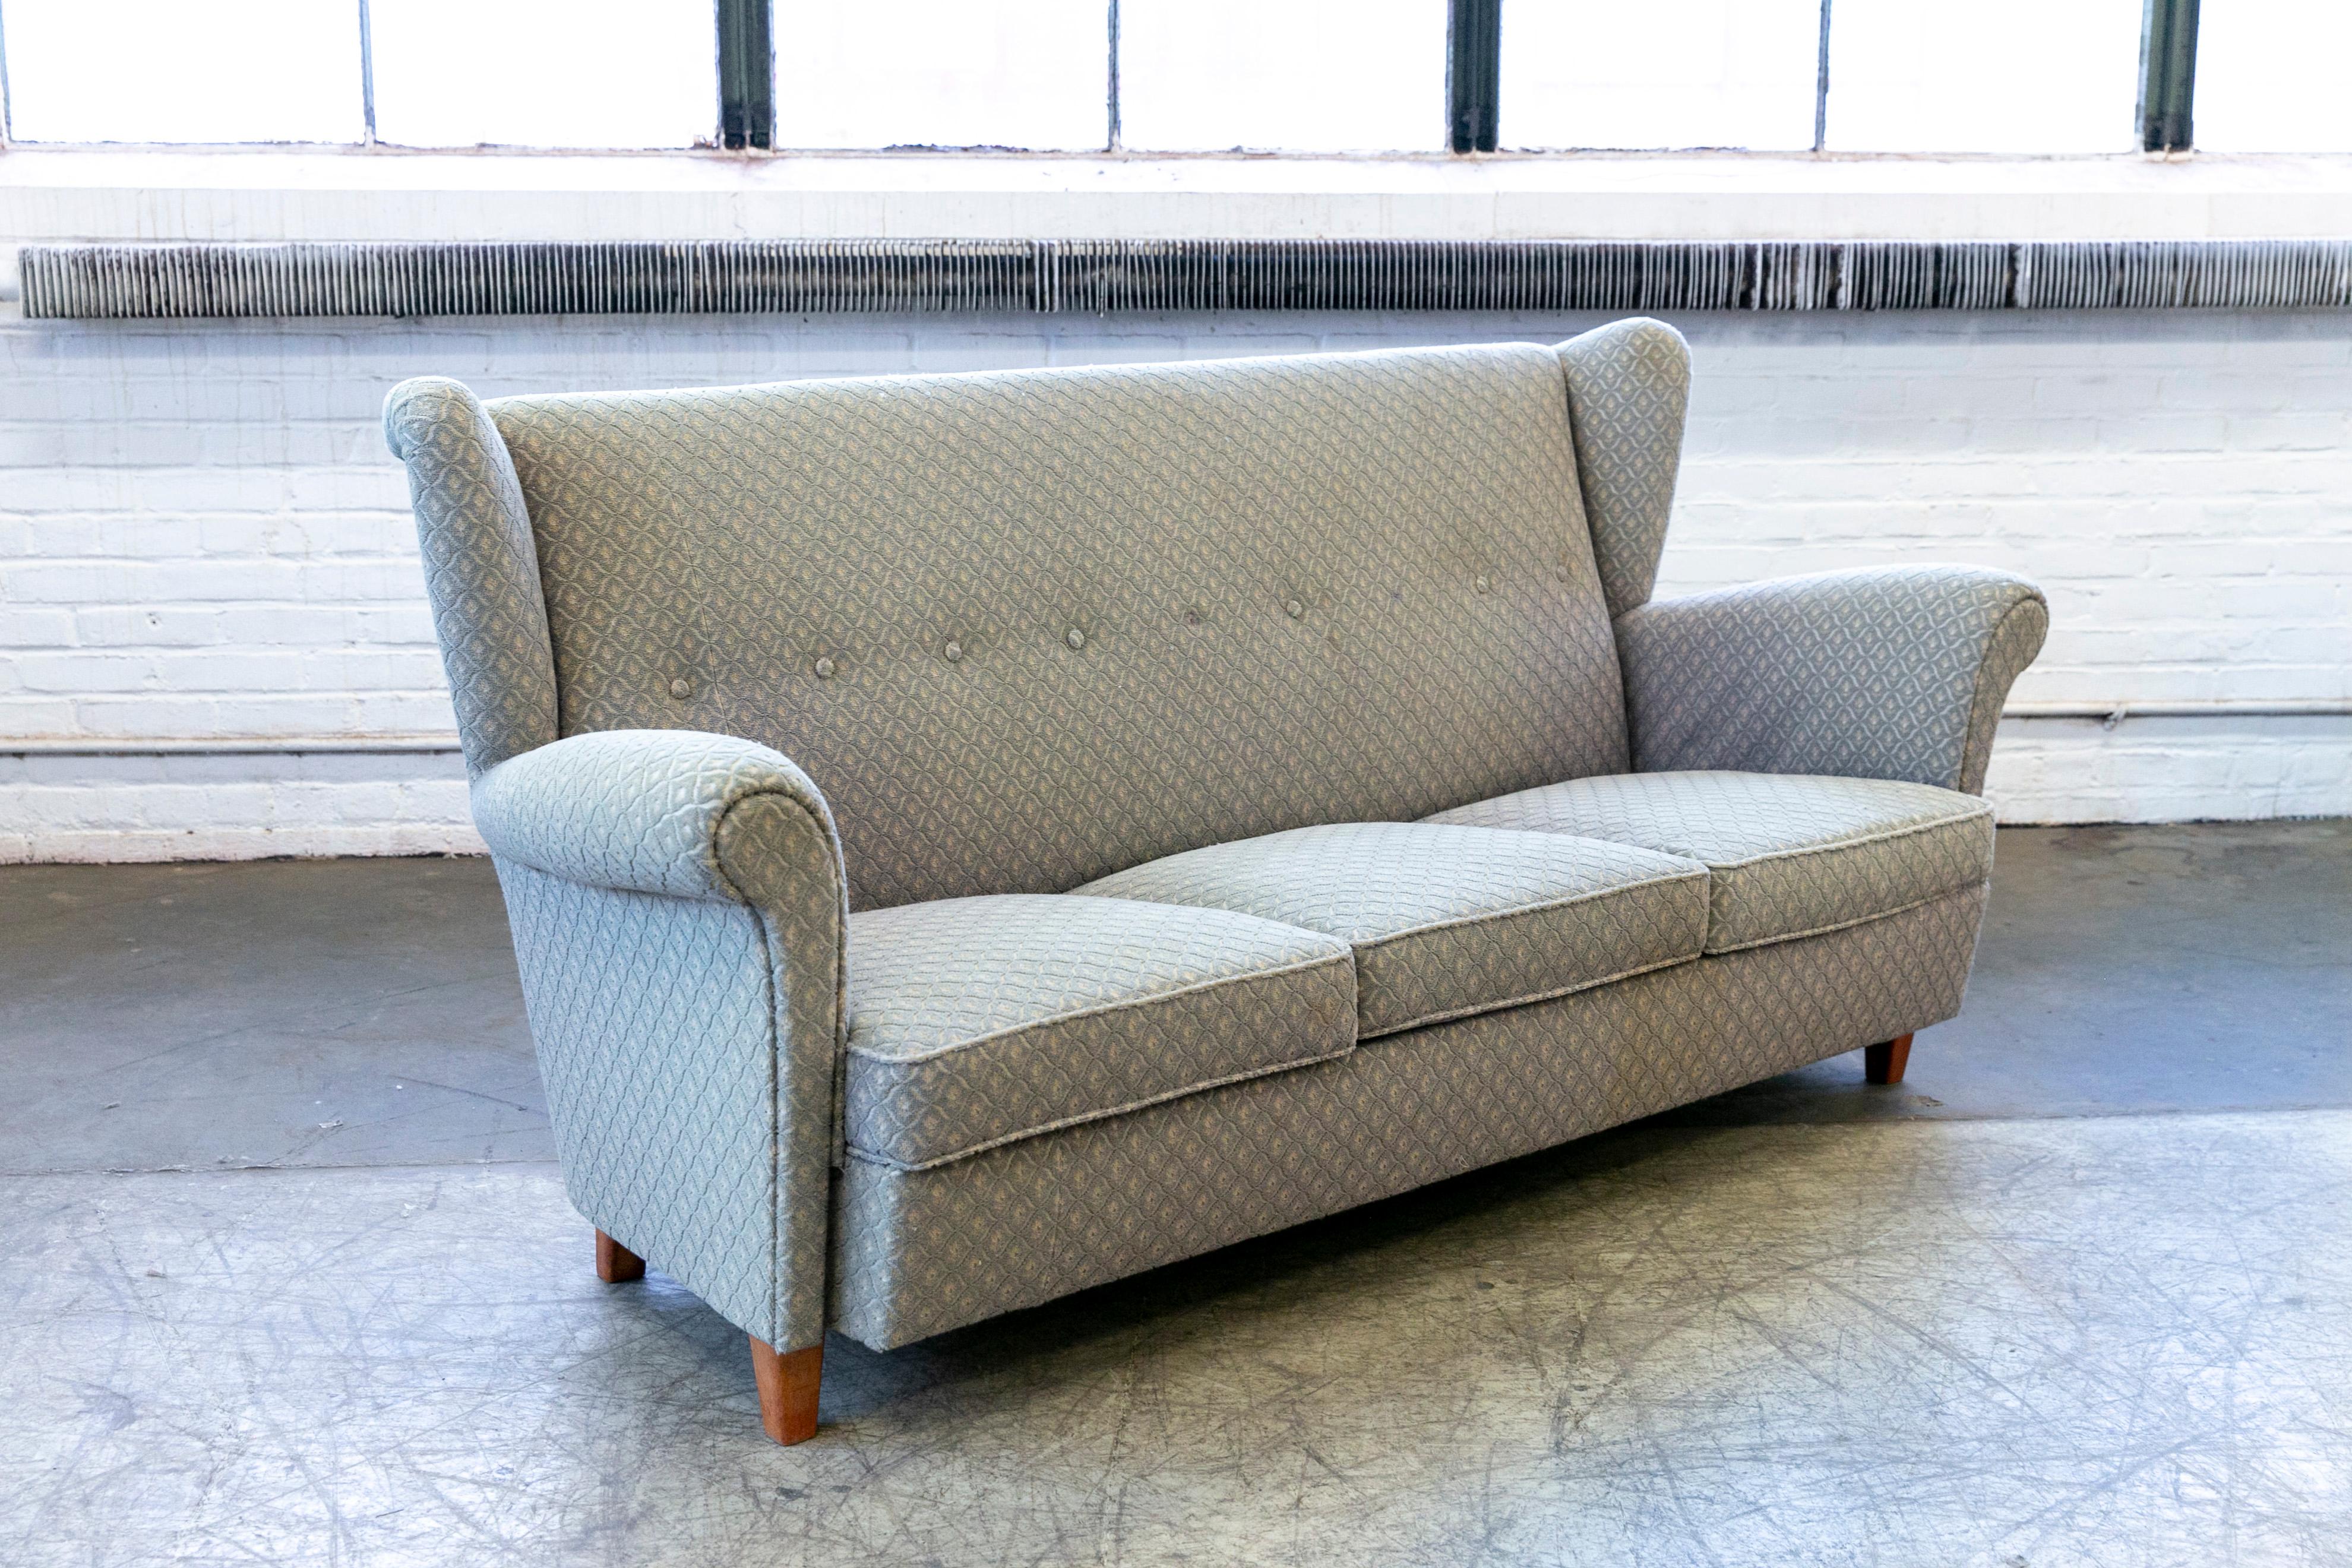 Very charming high back or wingback 1950s sofa from Denmark. The sofa is very reminiscent of Fritz Hansen's model 8112 loveseat but in this case somewhat larger and with a loose seat cushion covered. The piece is unmarked and we are unsure of who